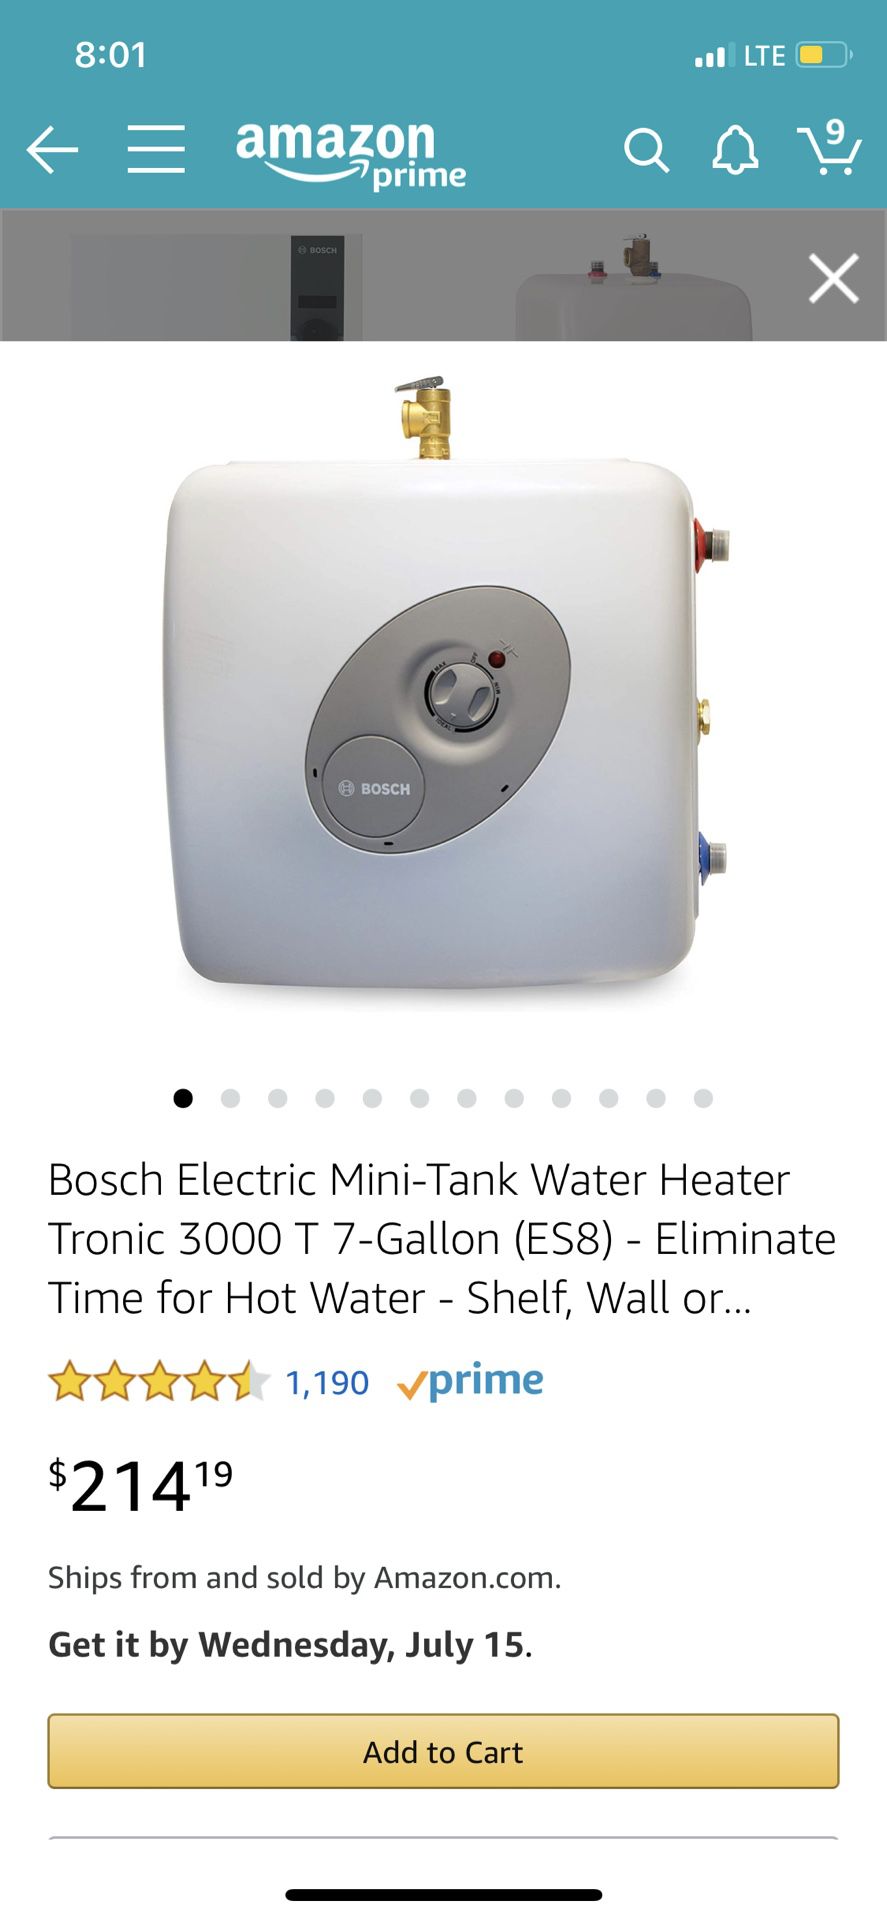 Electric tankless water heater lmk